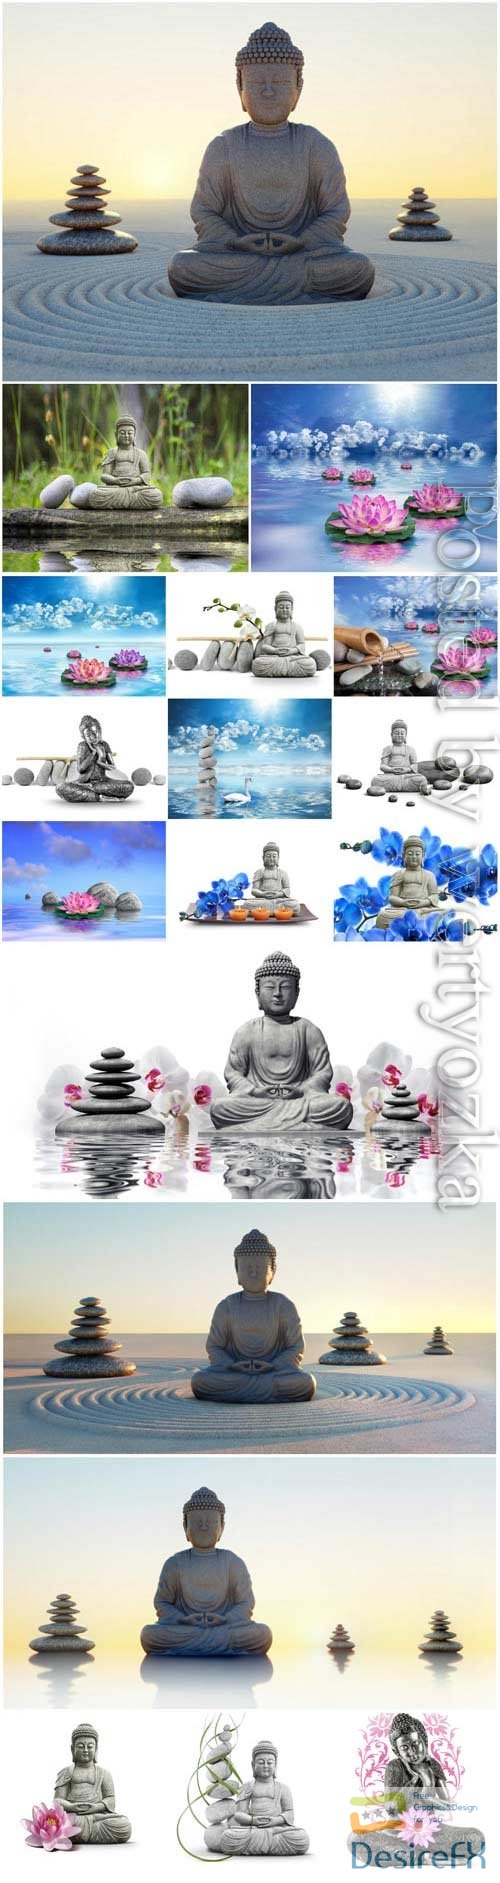 Buddha, spa stones and orchids stock photo